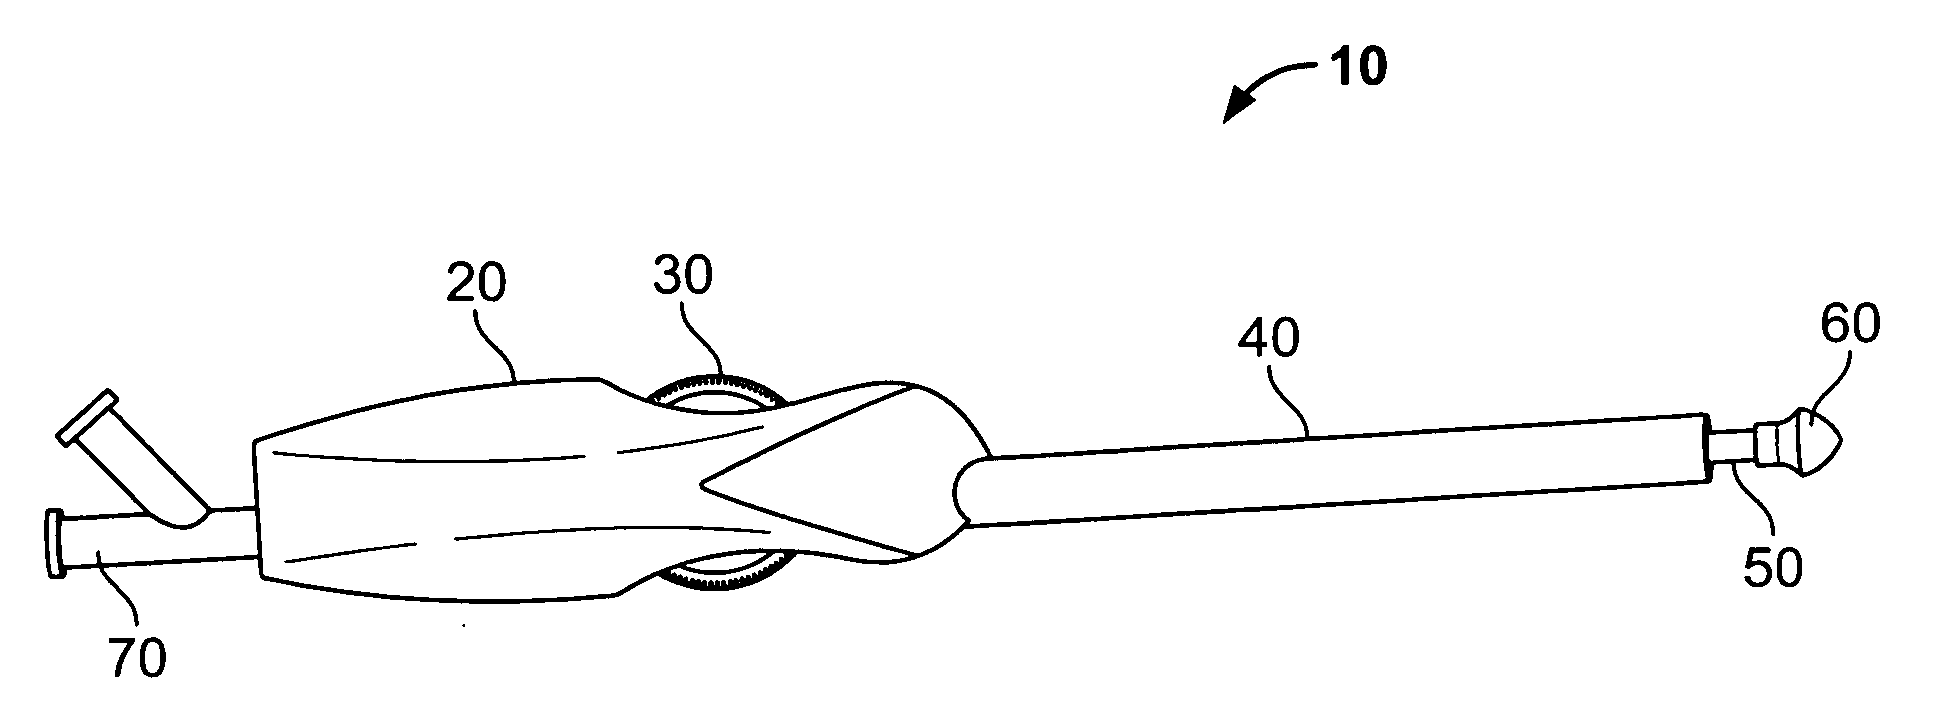 Apparatus and method for implanting collapsible/expandable prosthetic heart valves